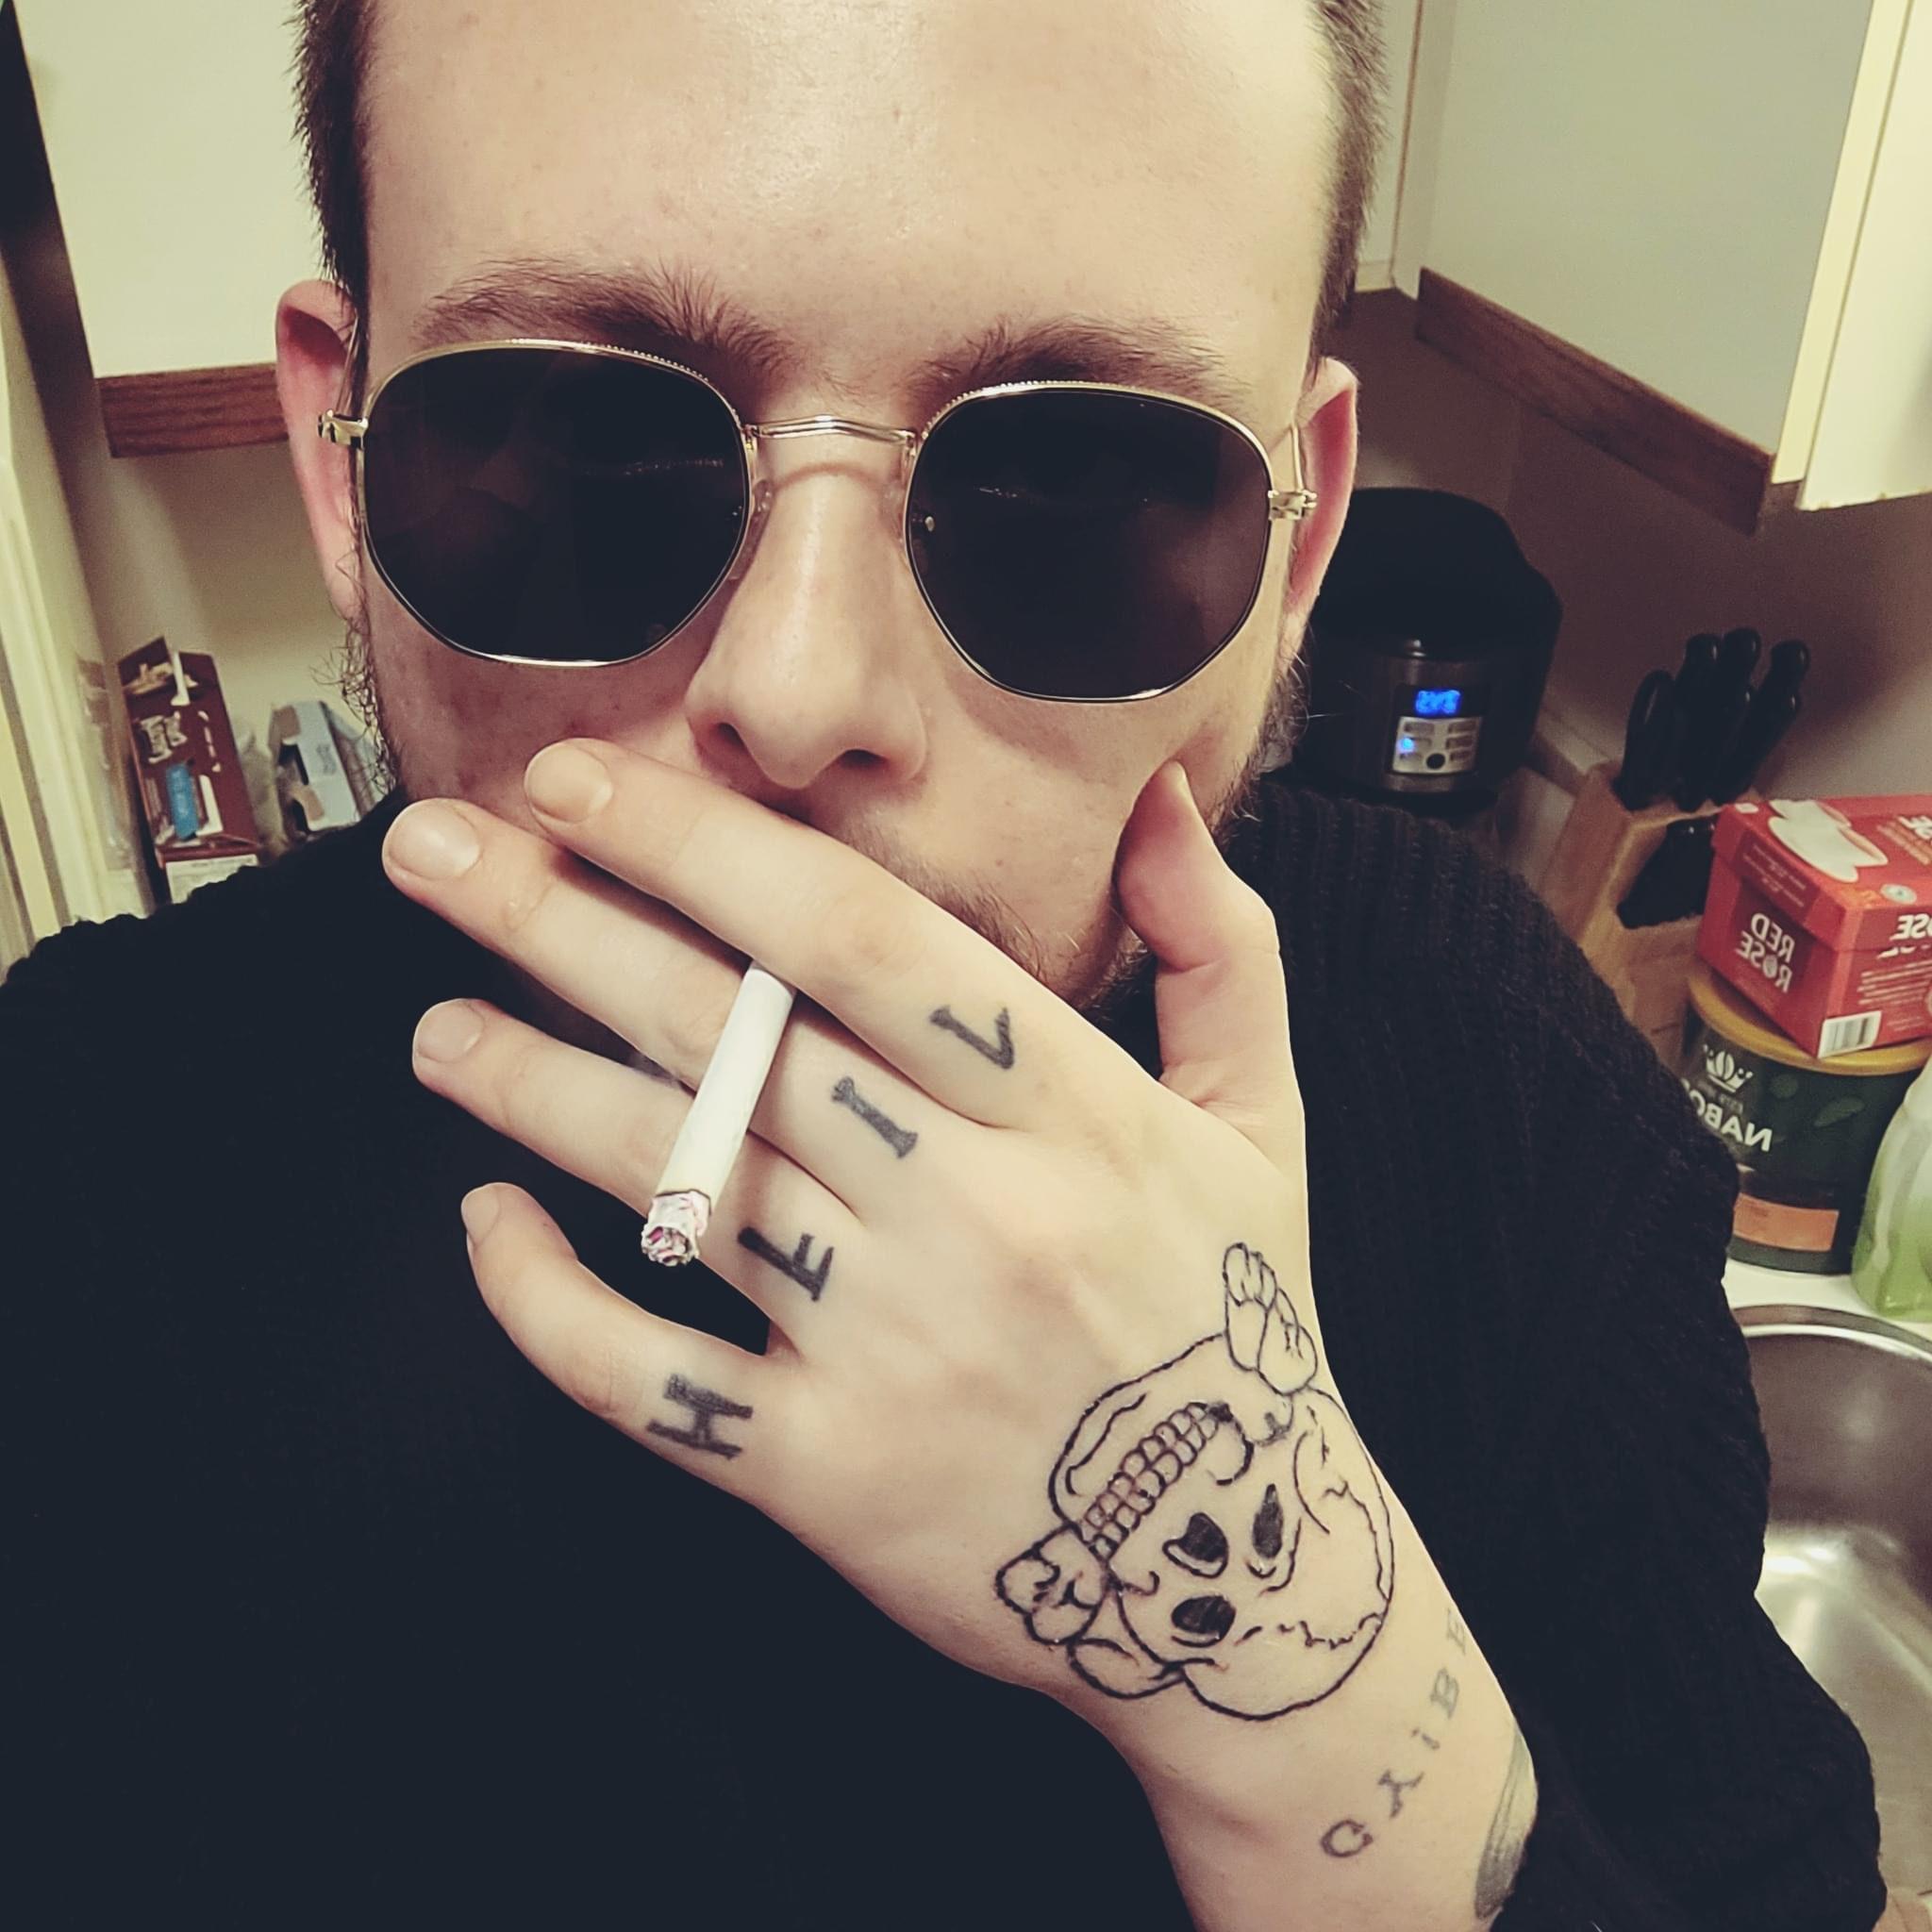 Steven Barker tattoos on his hand, a Totenkopf and “Heil”